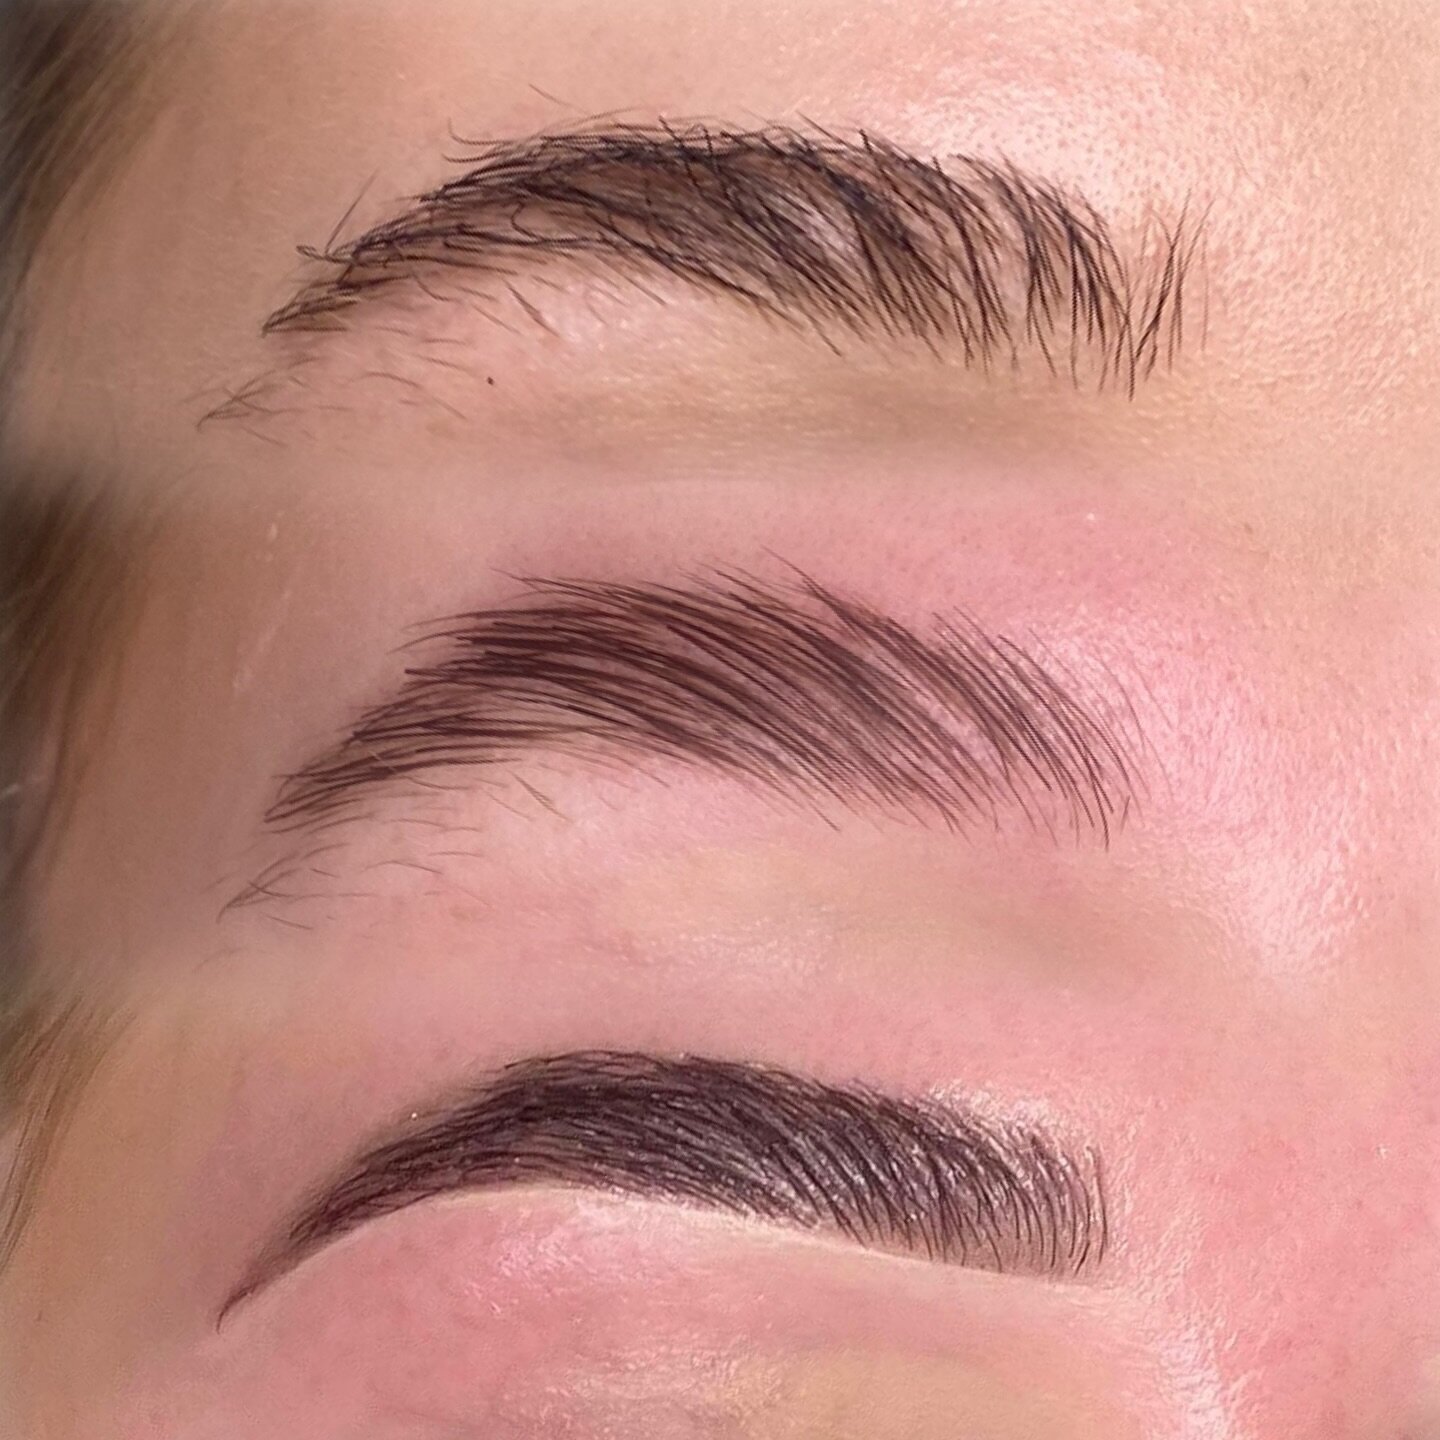 In love with the process and creating brow magic 😍🫶🏼✨

A Brow Lamination, Hybrid dye &amp; Sculpt from the very start to the finished end result 👏🏼 

A Brow Lamination is the perfect option for thin, sparse or naturally curly brow hairs giving y